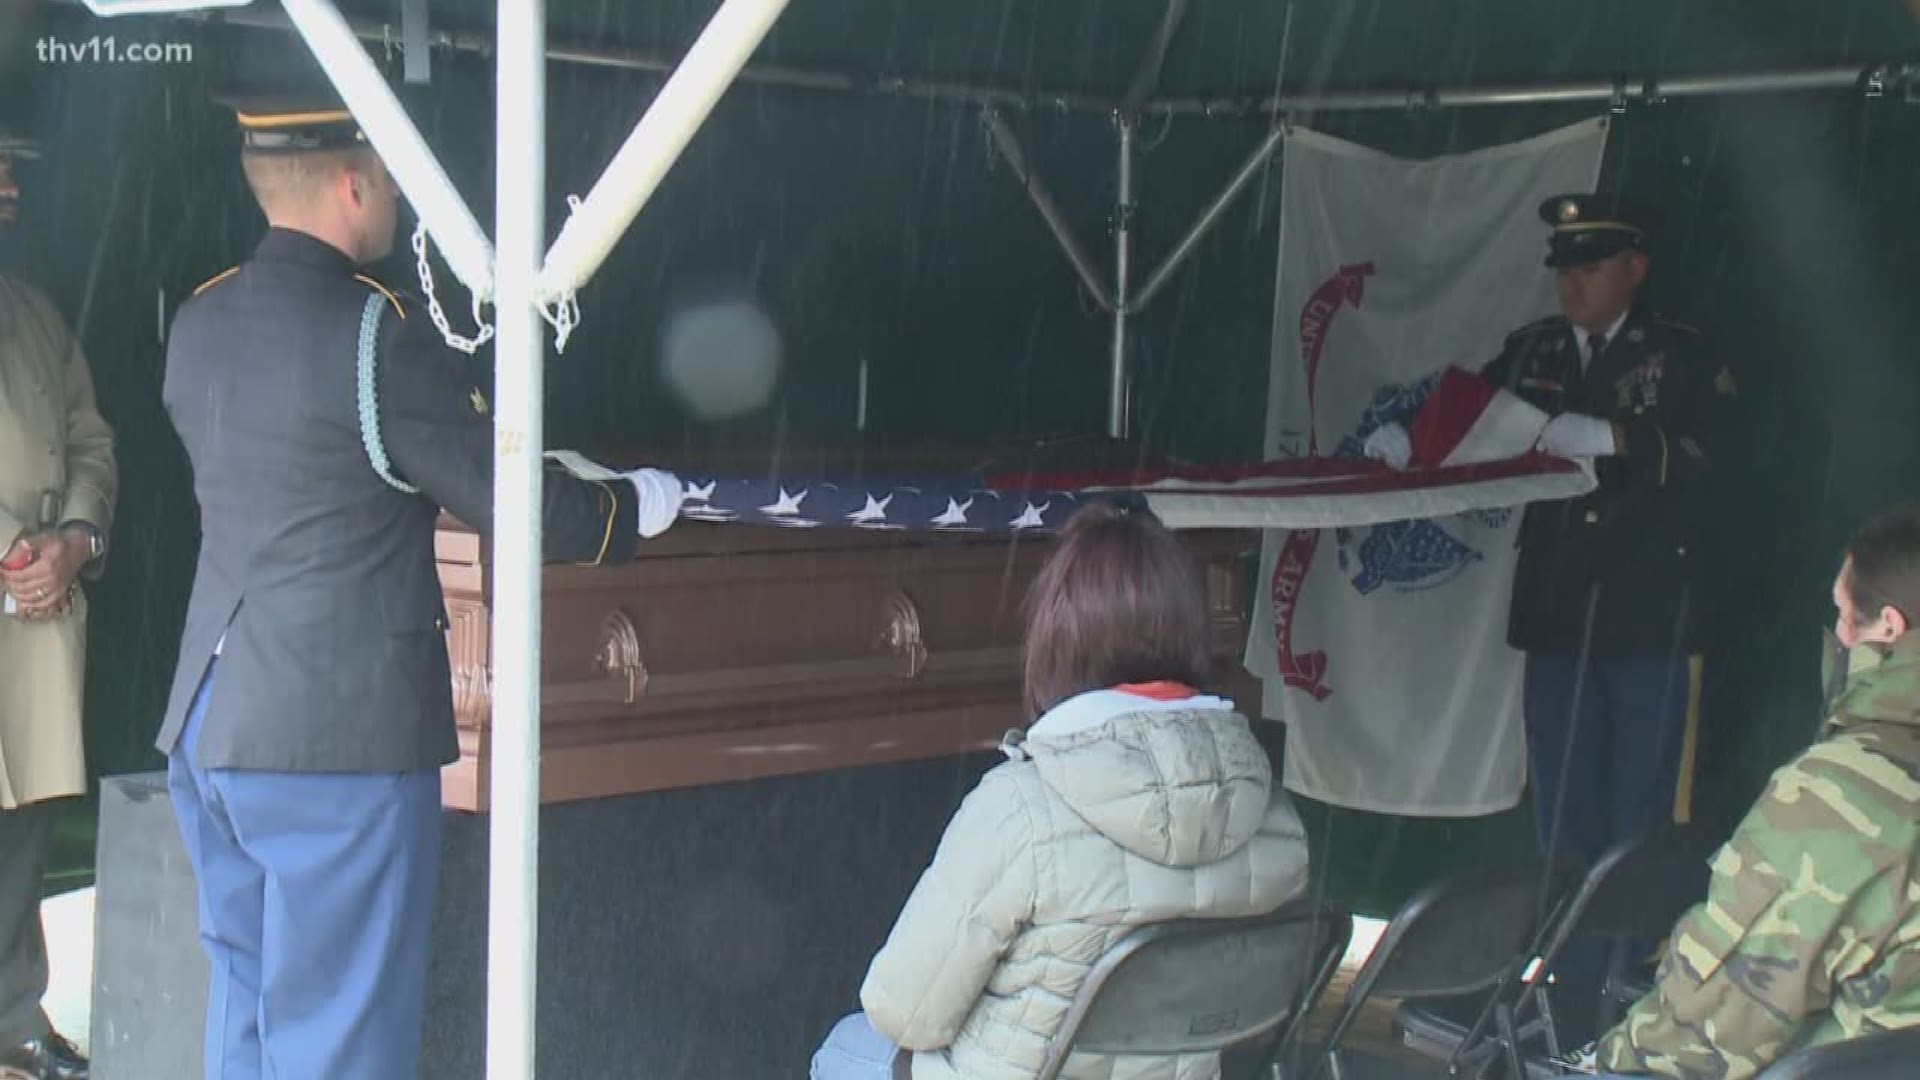 Military veterans and groups came together to honor and funeralize a fellow soldier who had no one else.